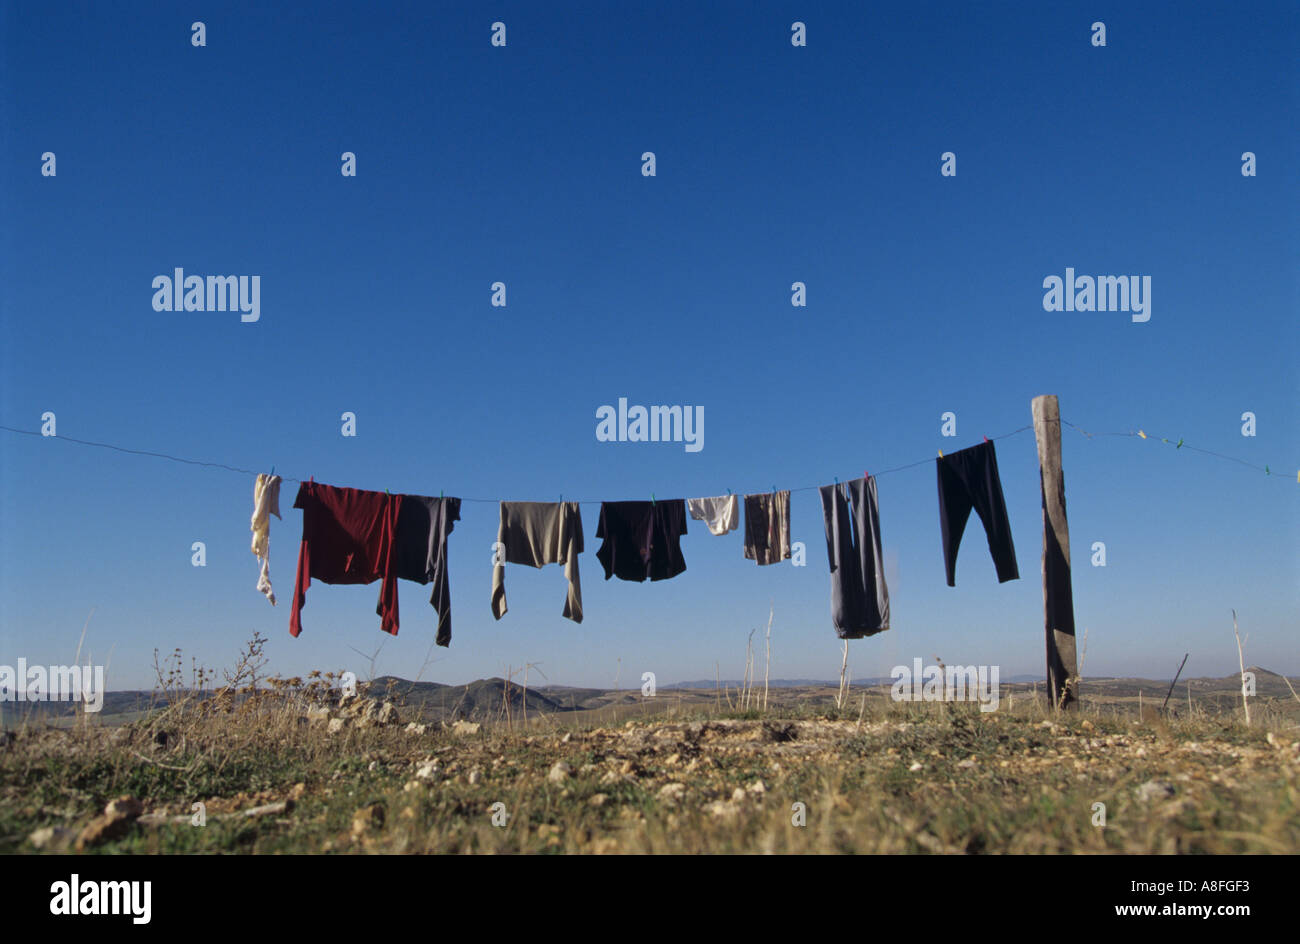 clothesline against blue sky in arid landscape Stock Photo